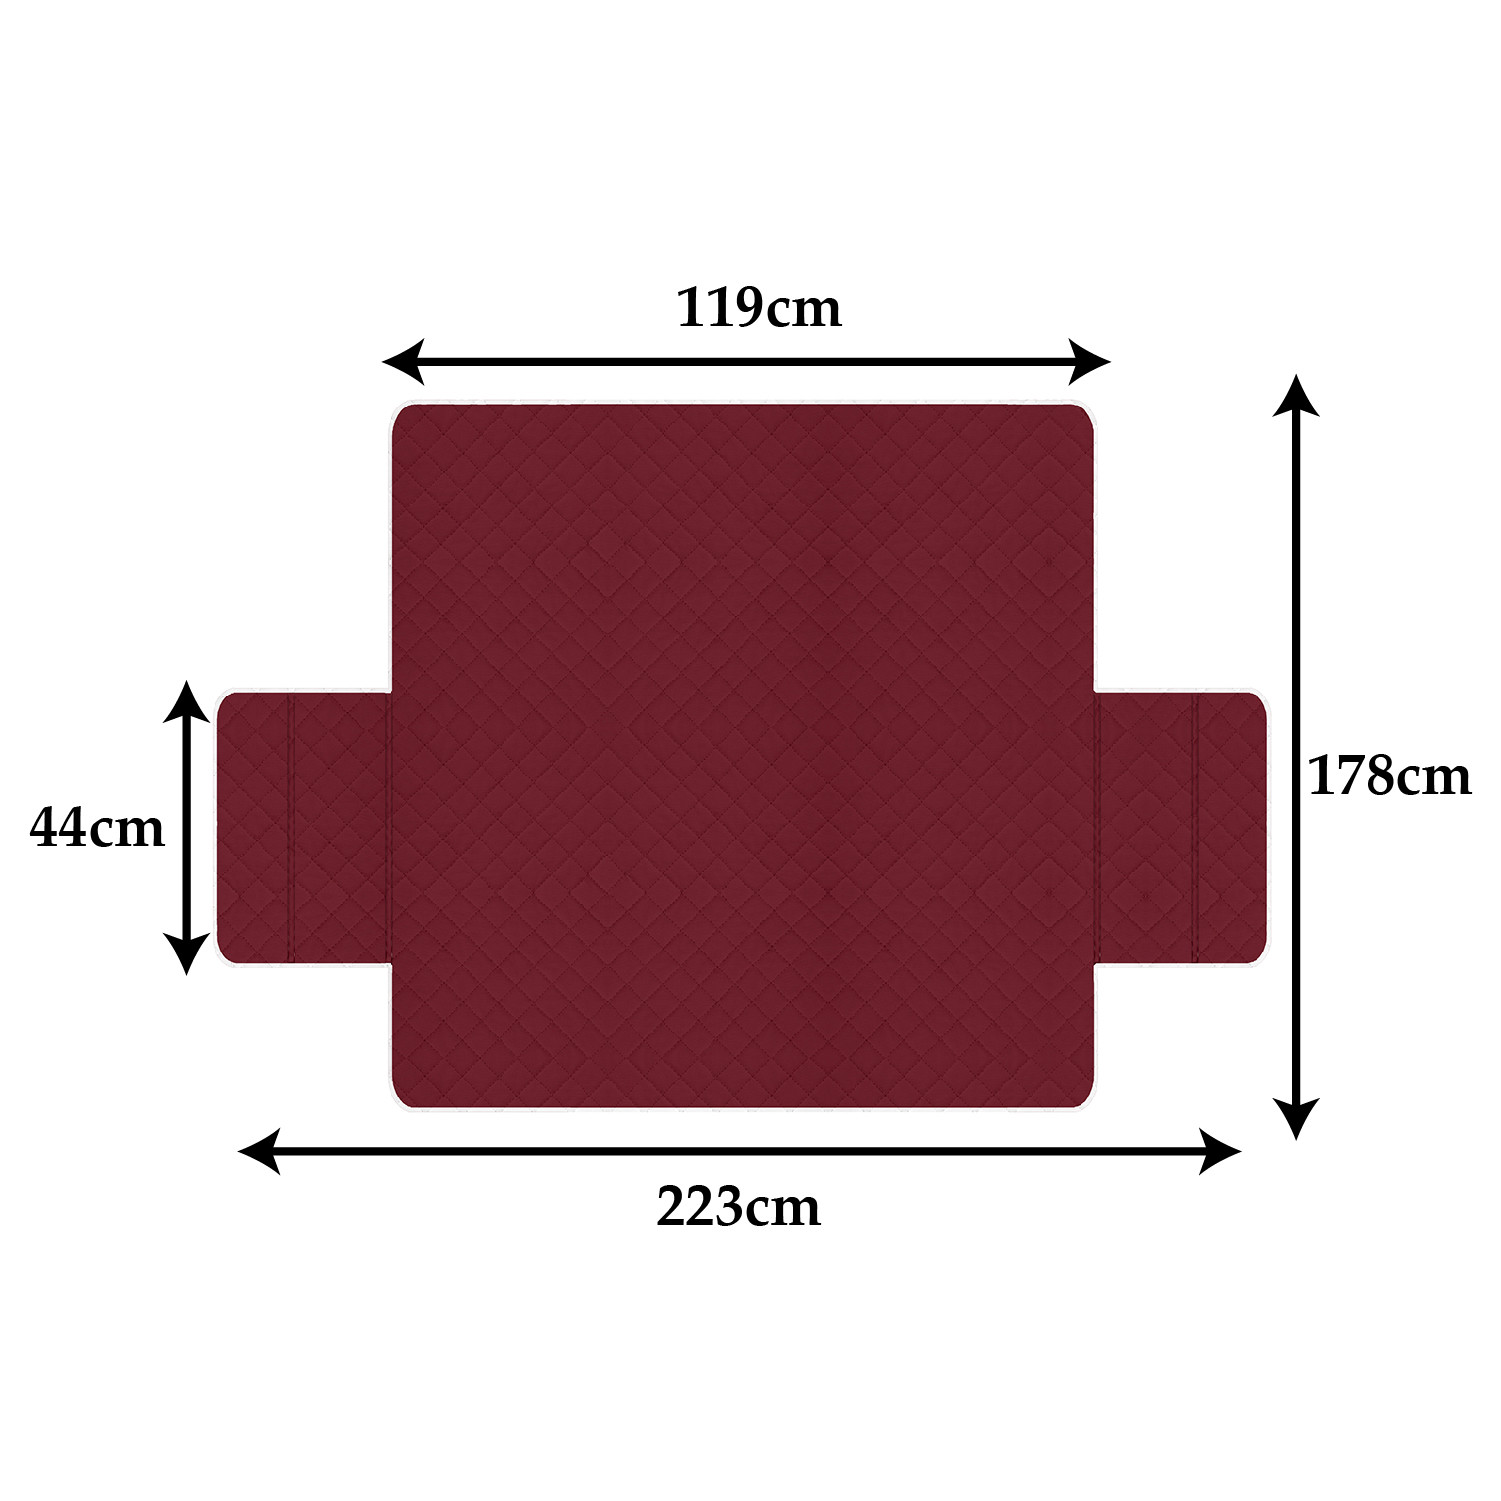 Kuber Industries Both Sided 2 Seater Sofa Cover|Polyester Check Design Couch Cover|Non-Slip Stretchy Sofa Slipcovers (Maroon & Gray)